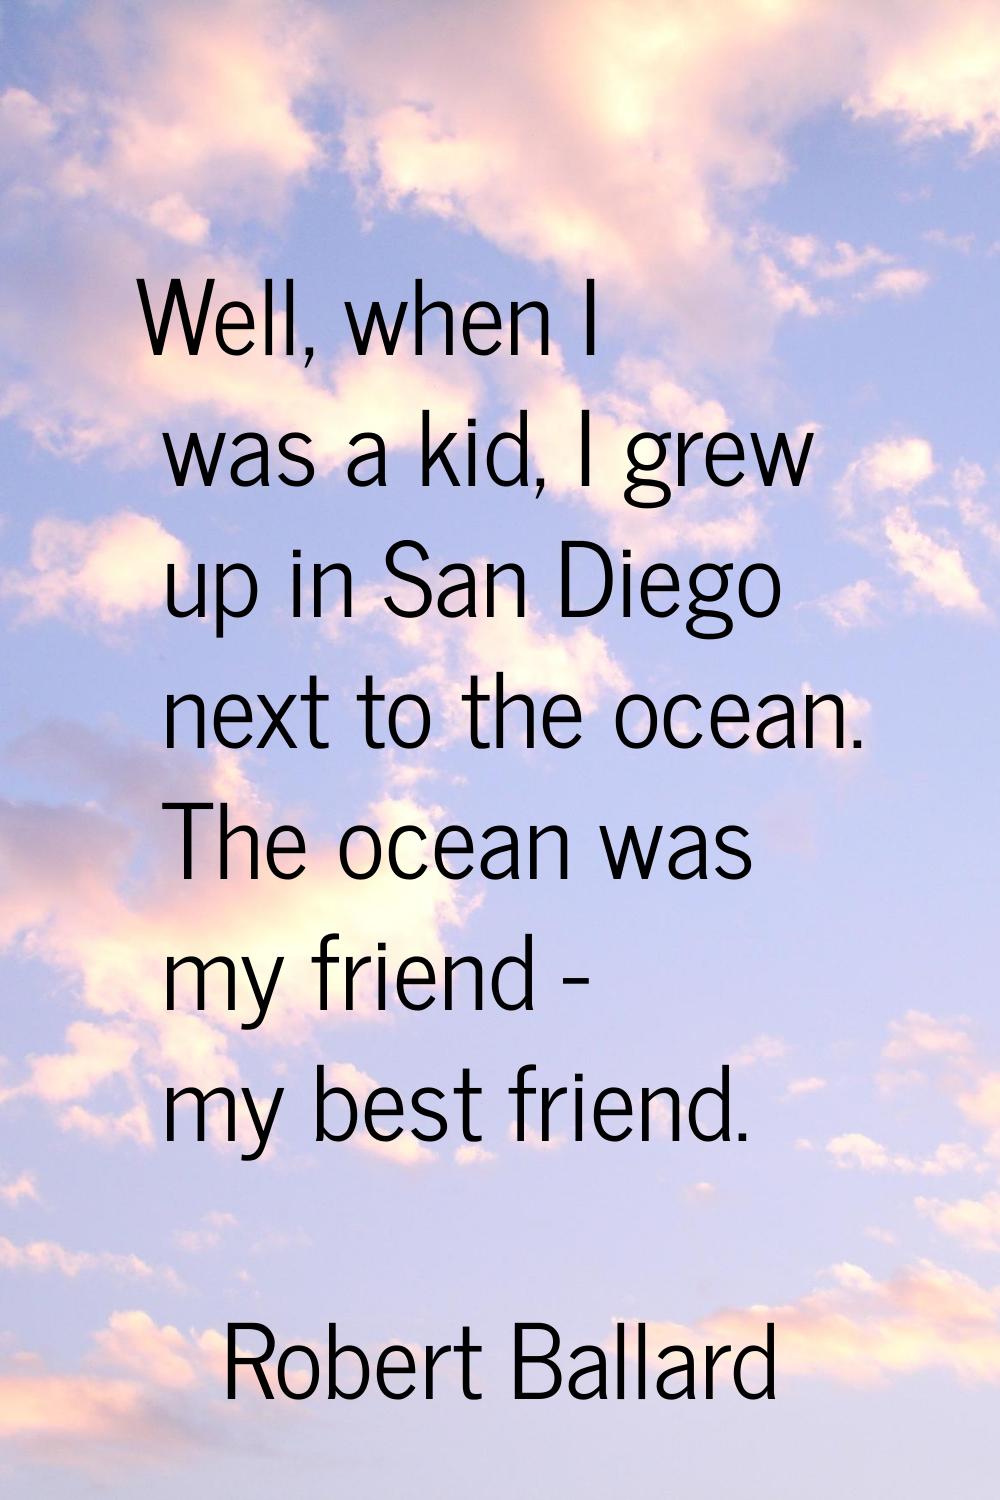 Well, when I was a kid, I grew up in San Diego next to the ocean. The ocean was my friend - my best